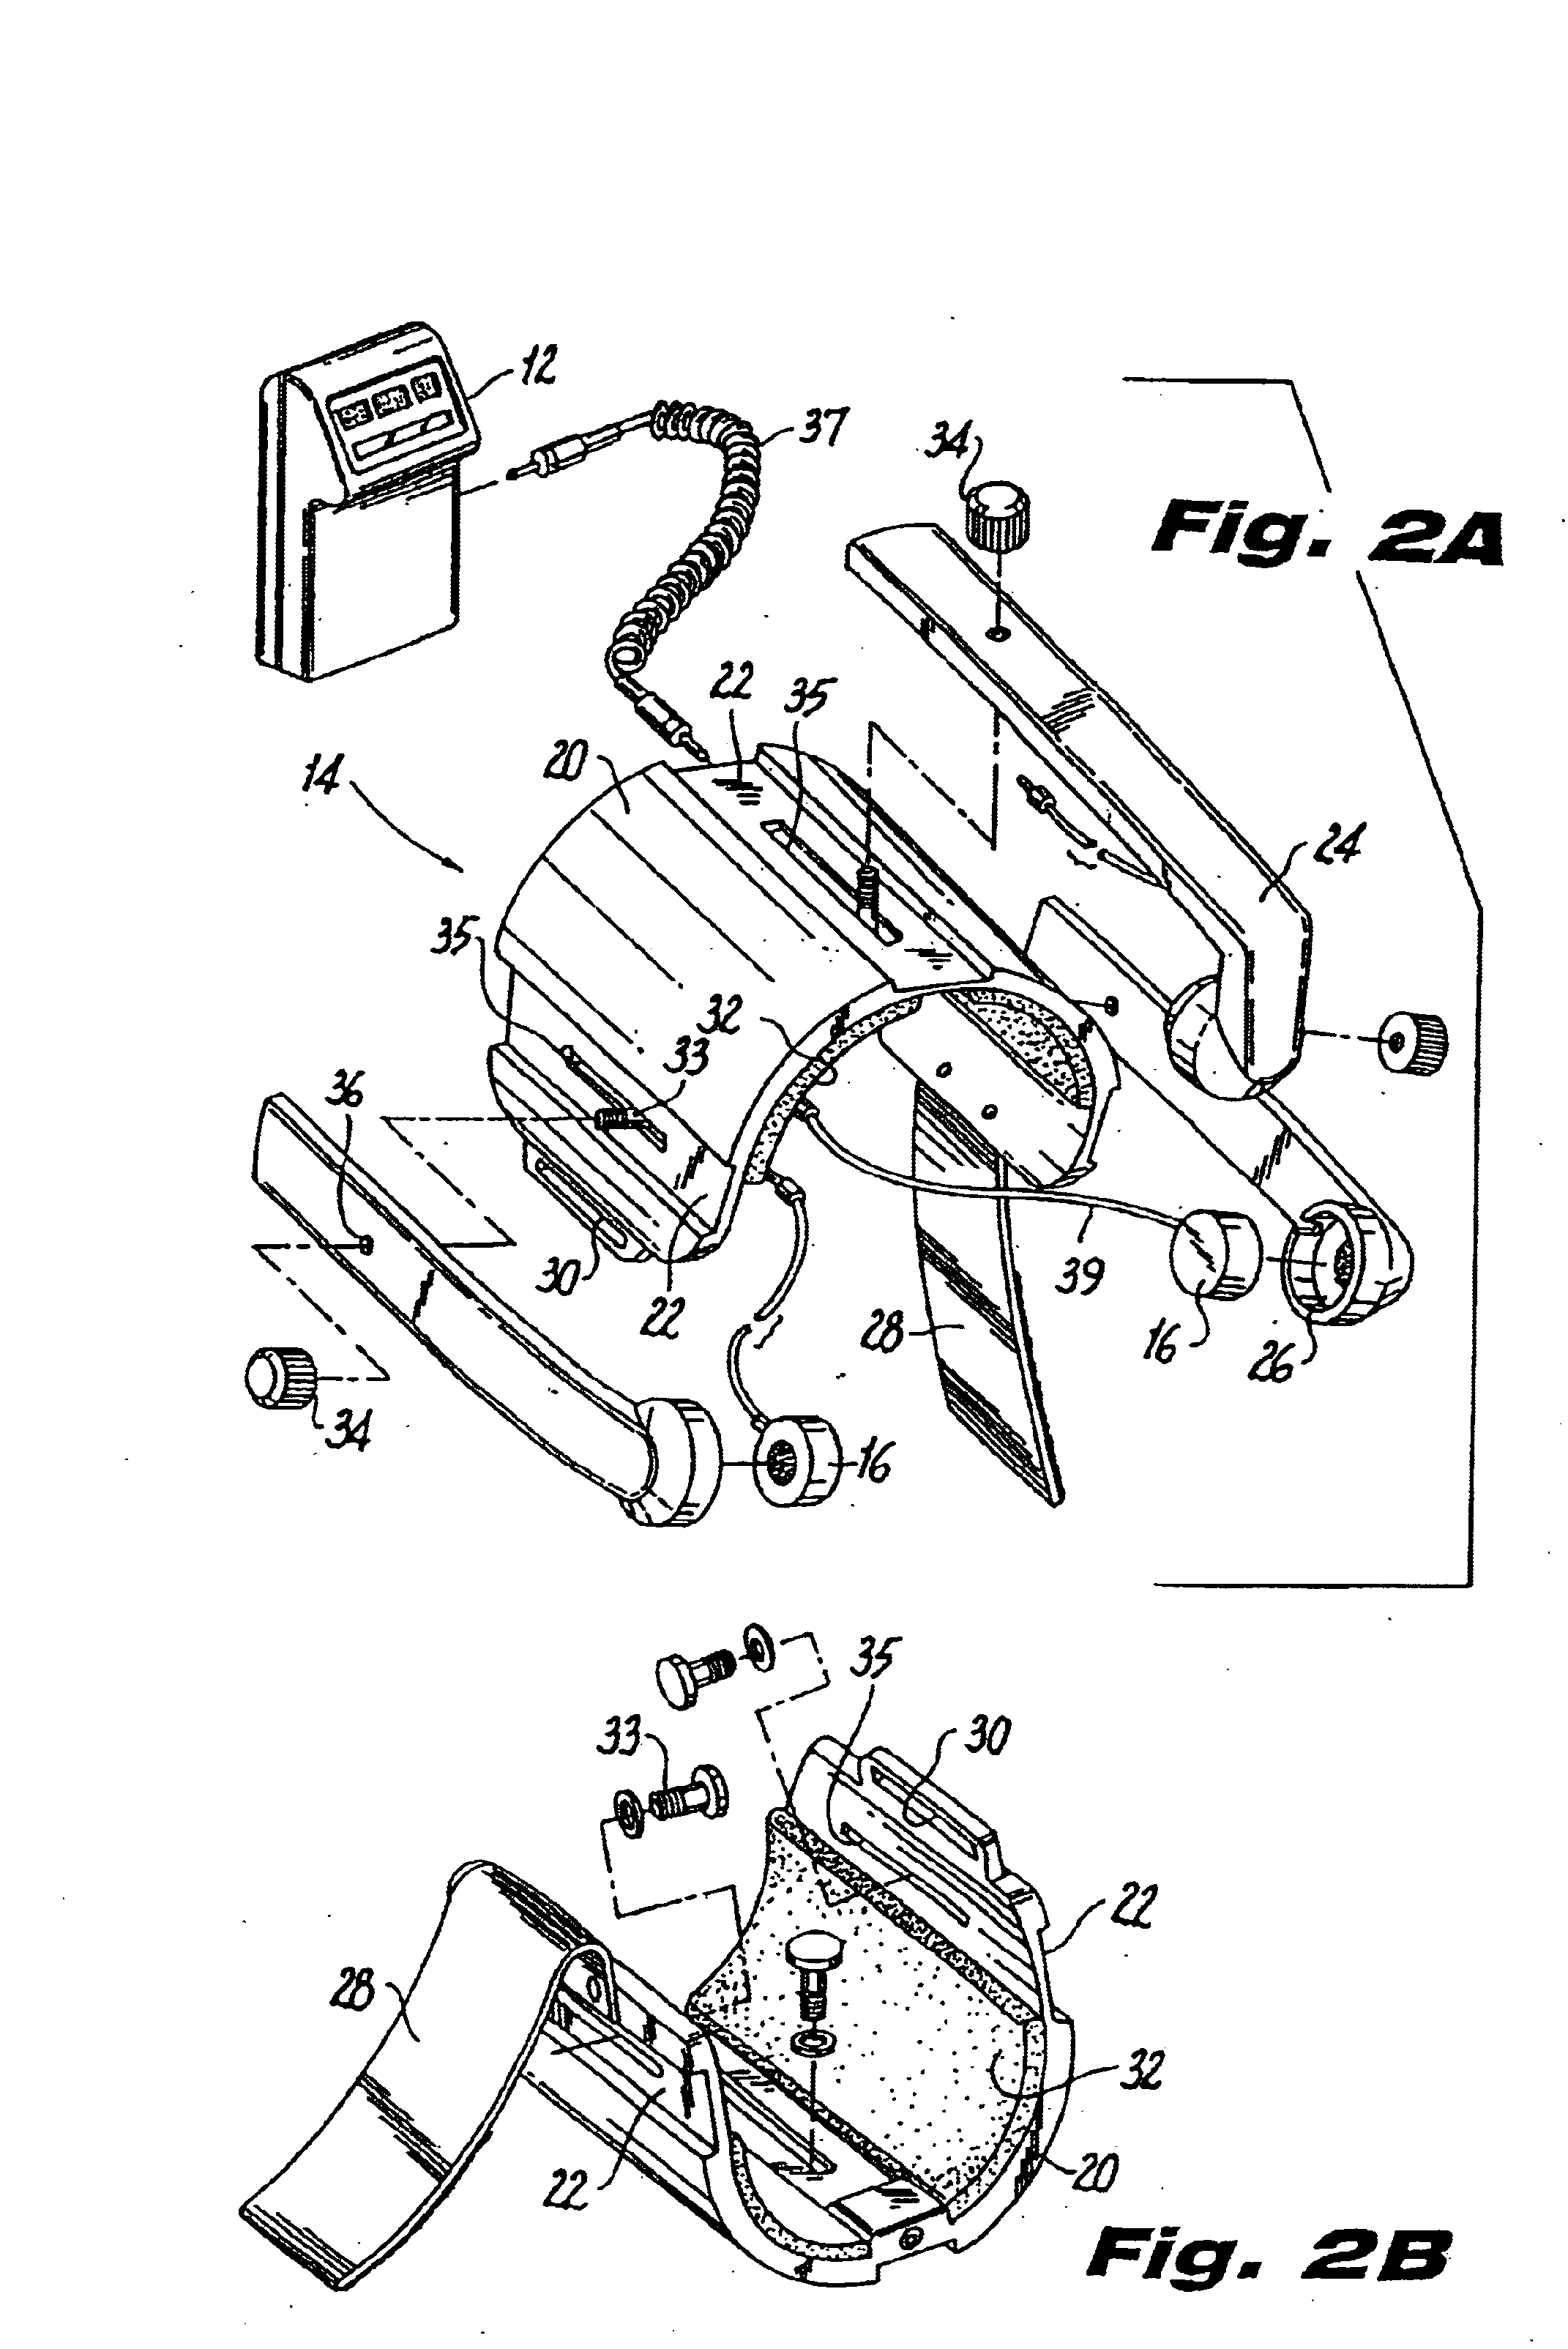 Method and apparatus for cartilage growth stimulation